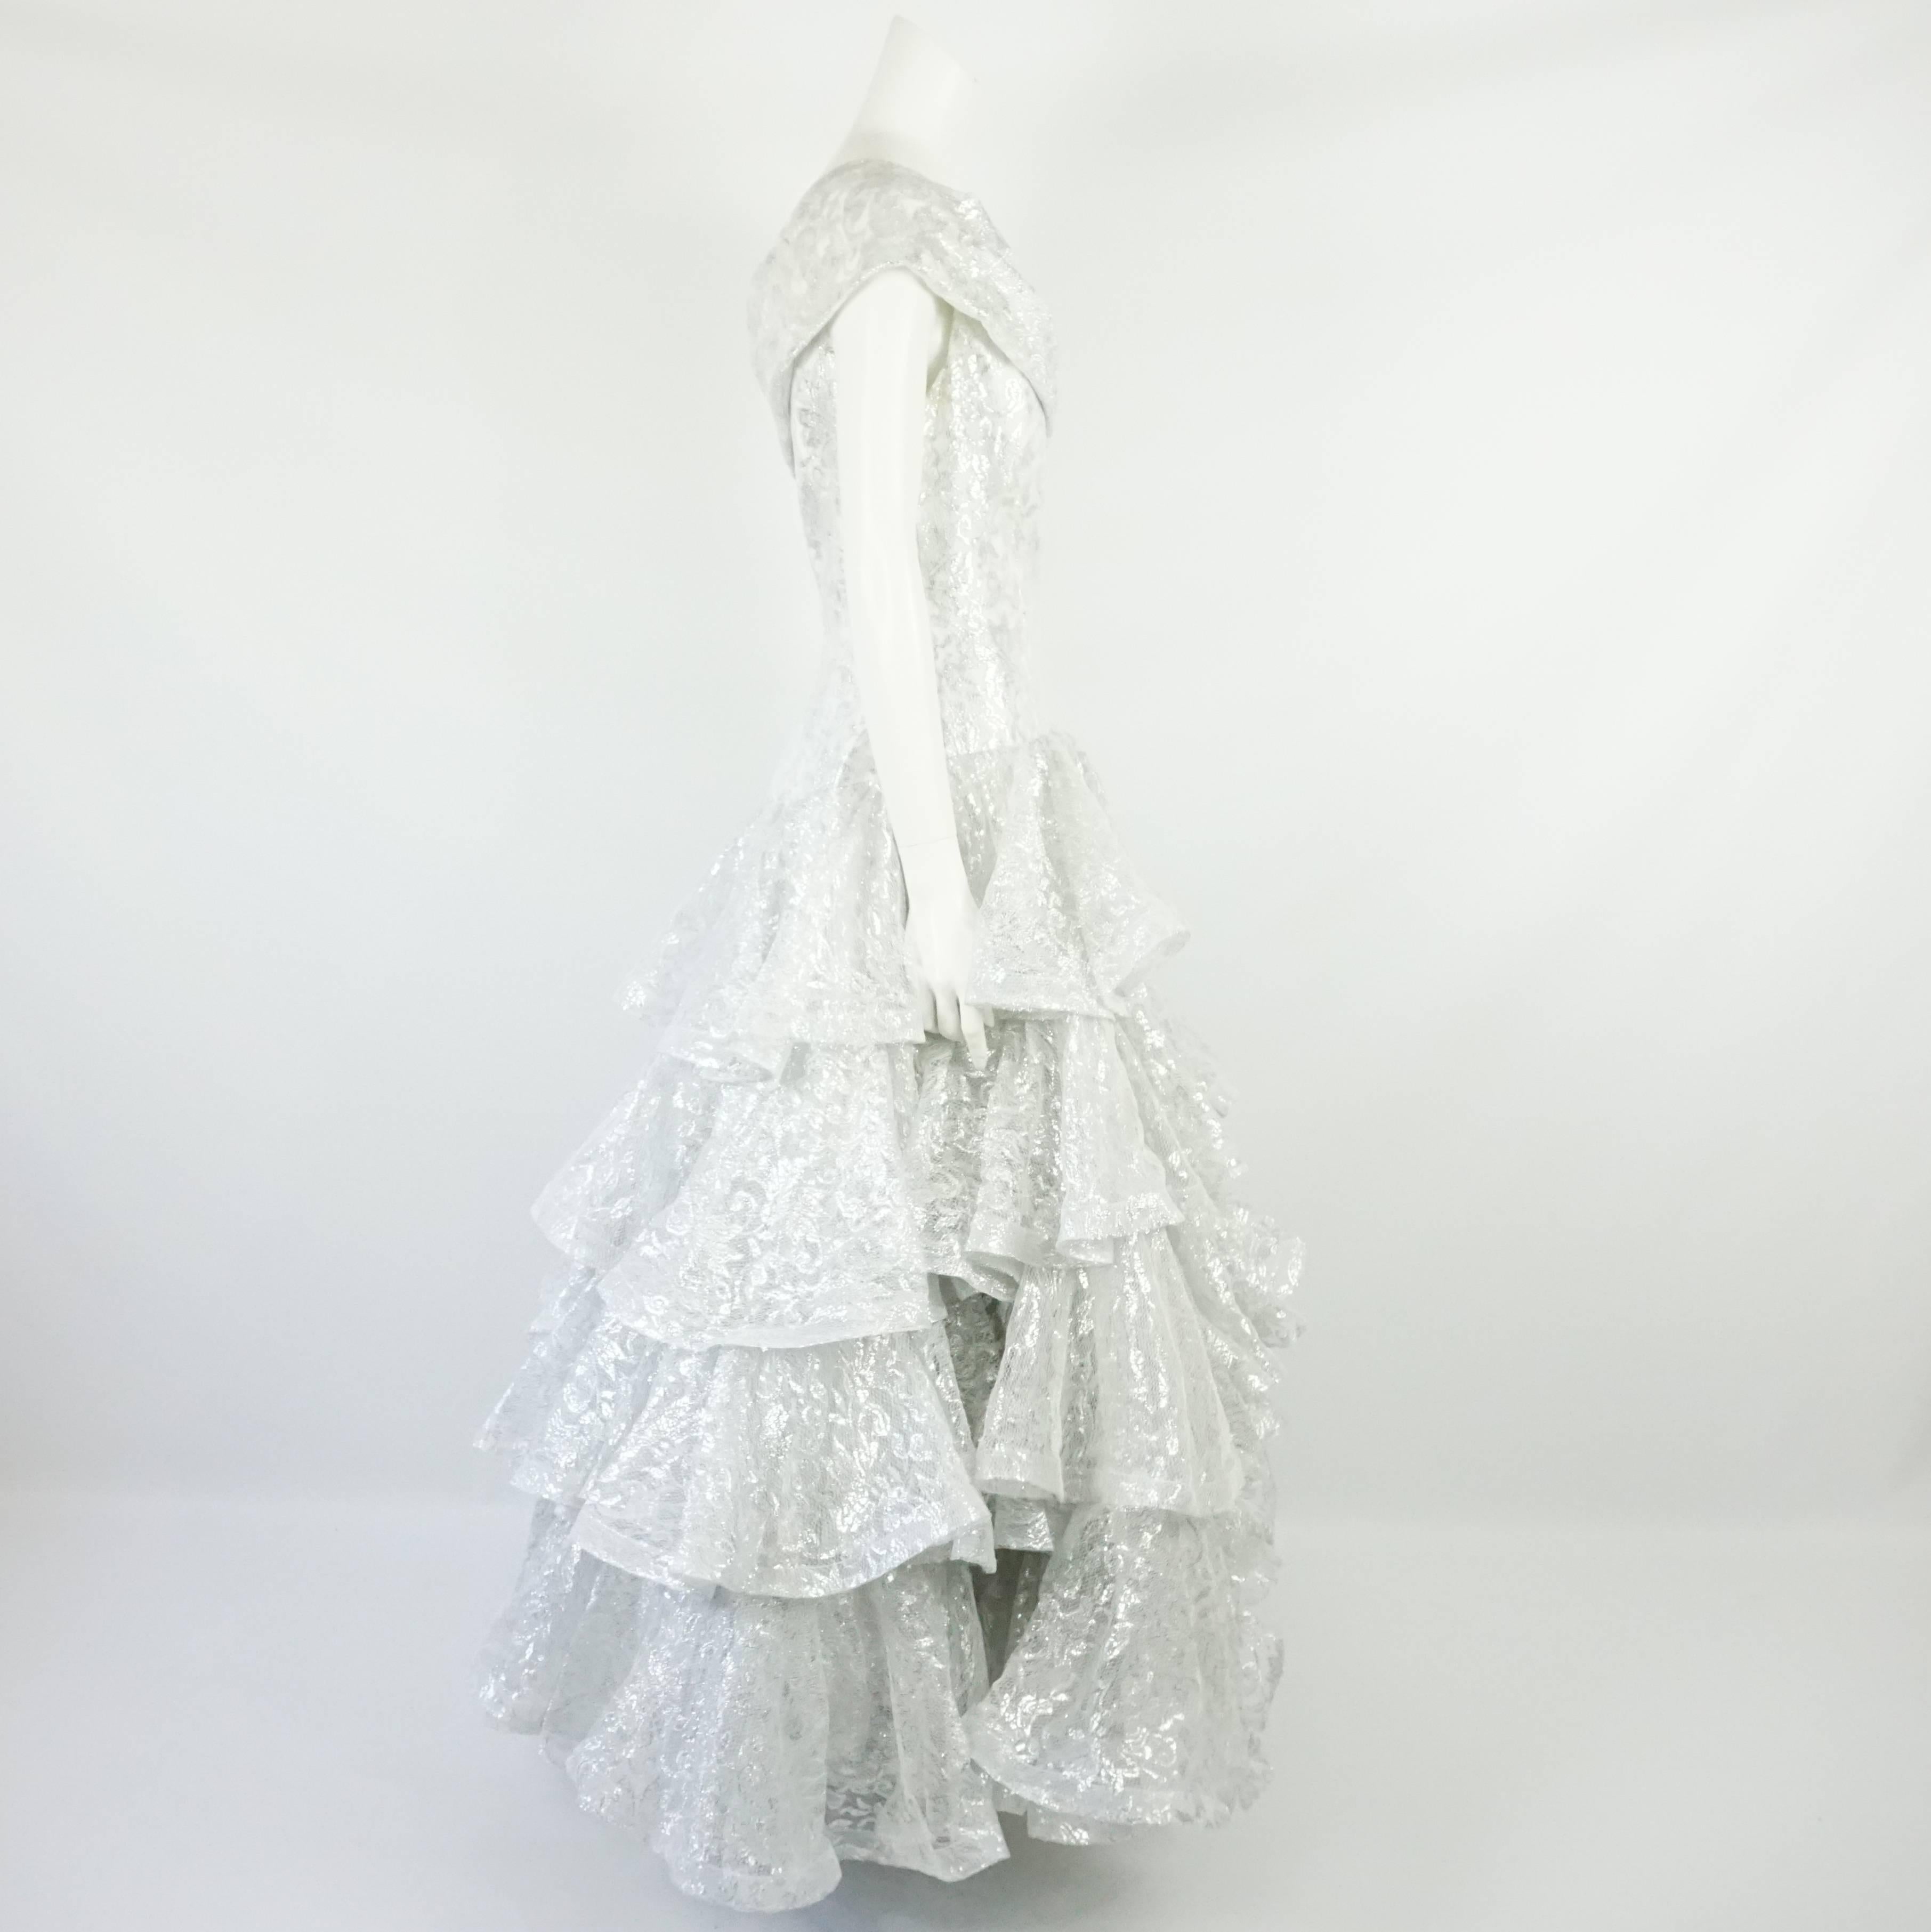 Scaasi White and Silver Silk Lace One-Shoulder Ruffled Ball Gown - 10. Circa 90's. This beautiful gown has 4 tiers of layered ruffles. There is 1 layer of lace, 2 of tulle, and 1 inside layer of white silk lining. The bodice is fitted and has a